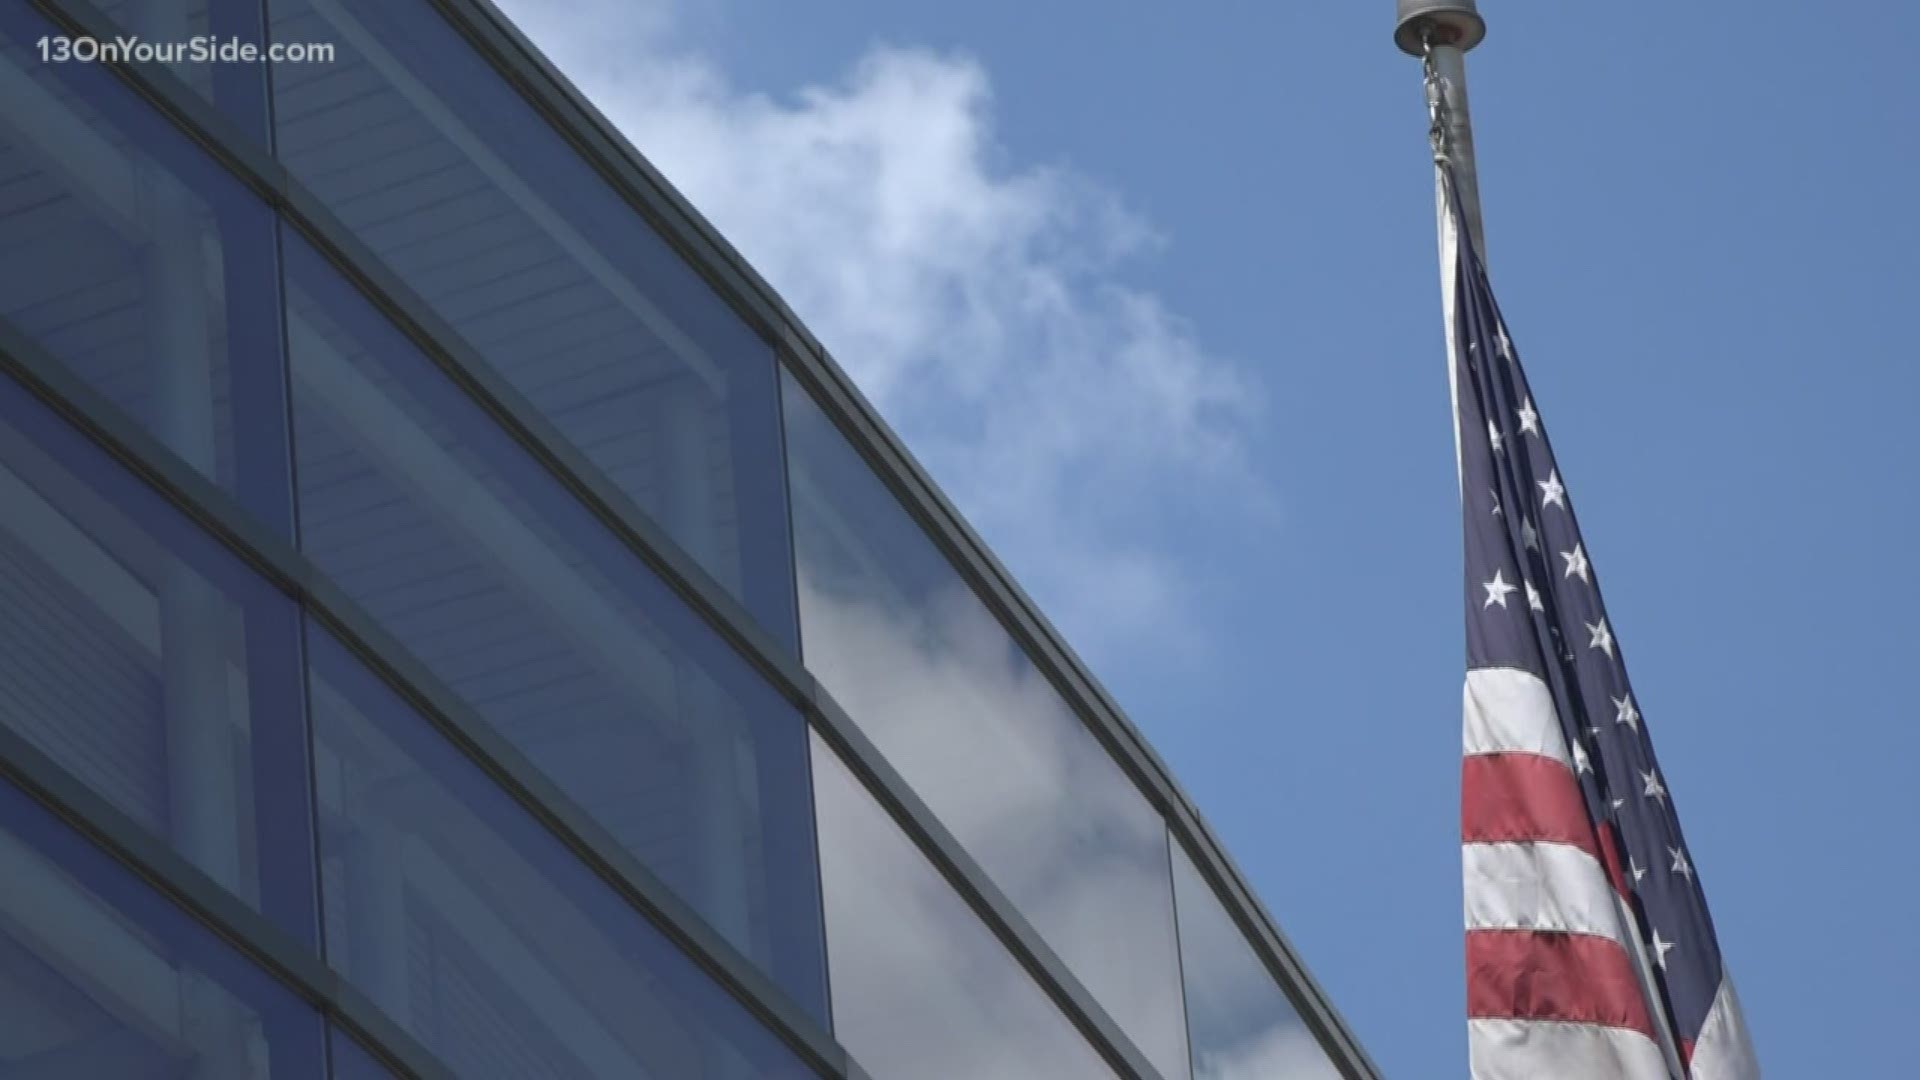 State Rep. only wants Michigan & U.S. flags flown on State Building